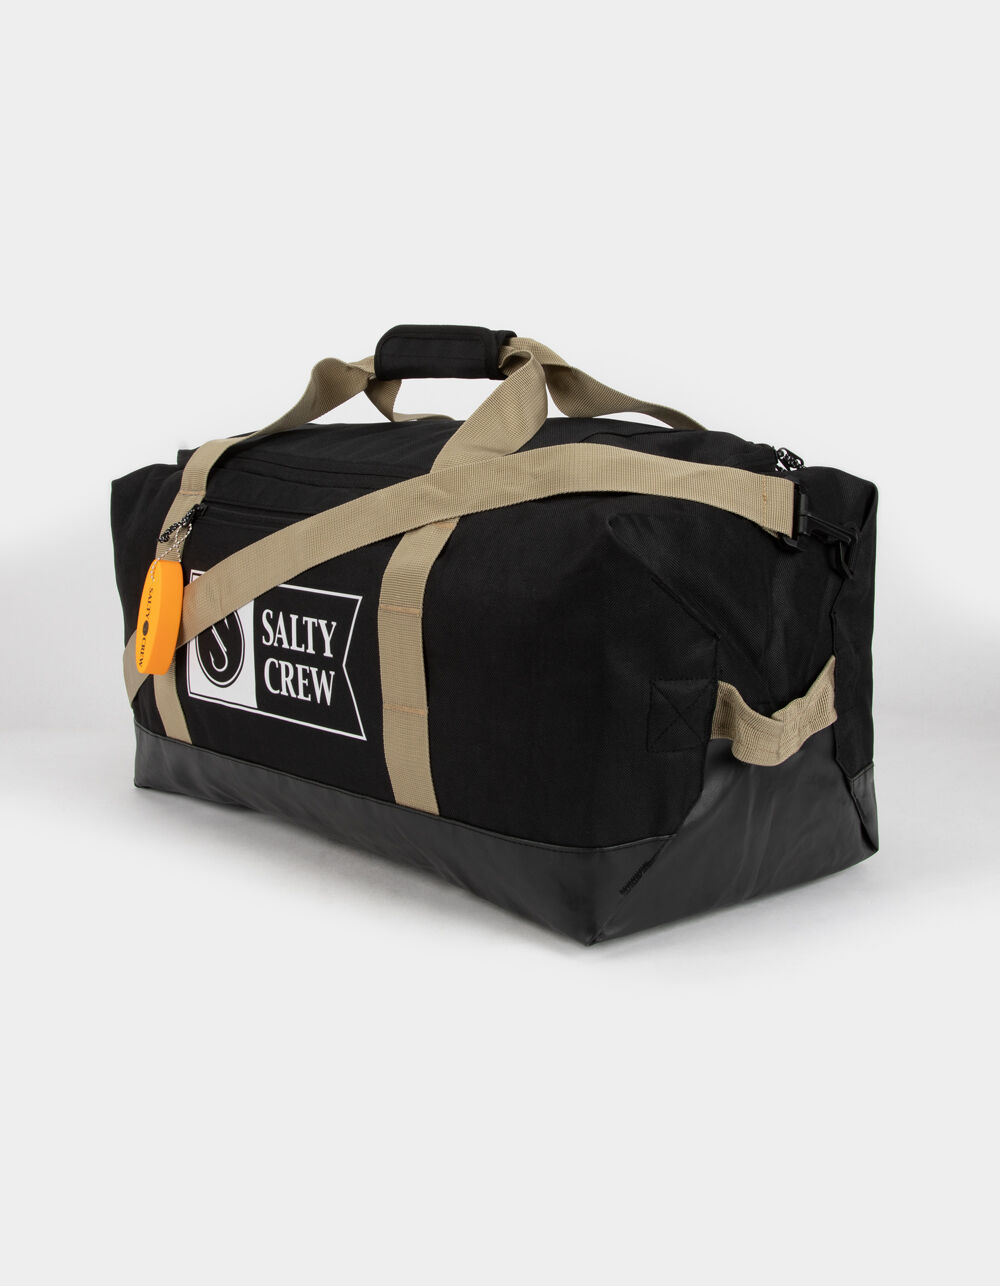 The Salty Crew Bag Collection. All three bags specifically